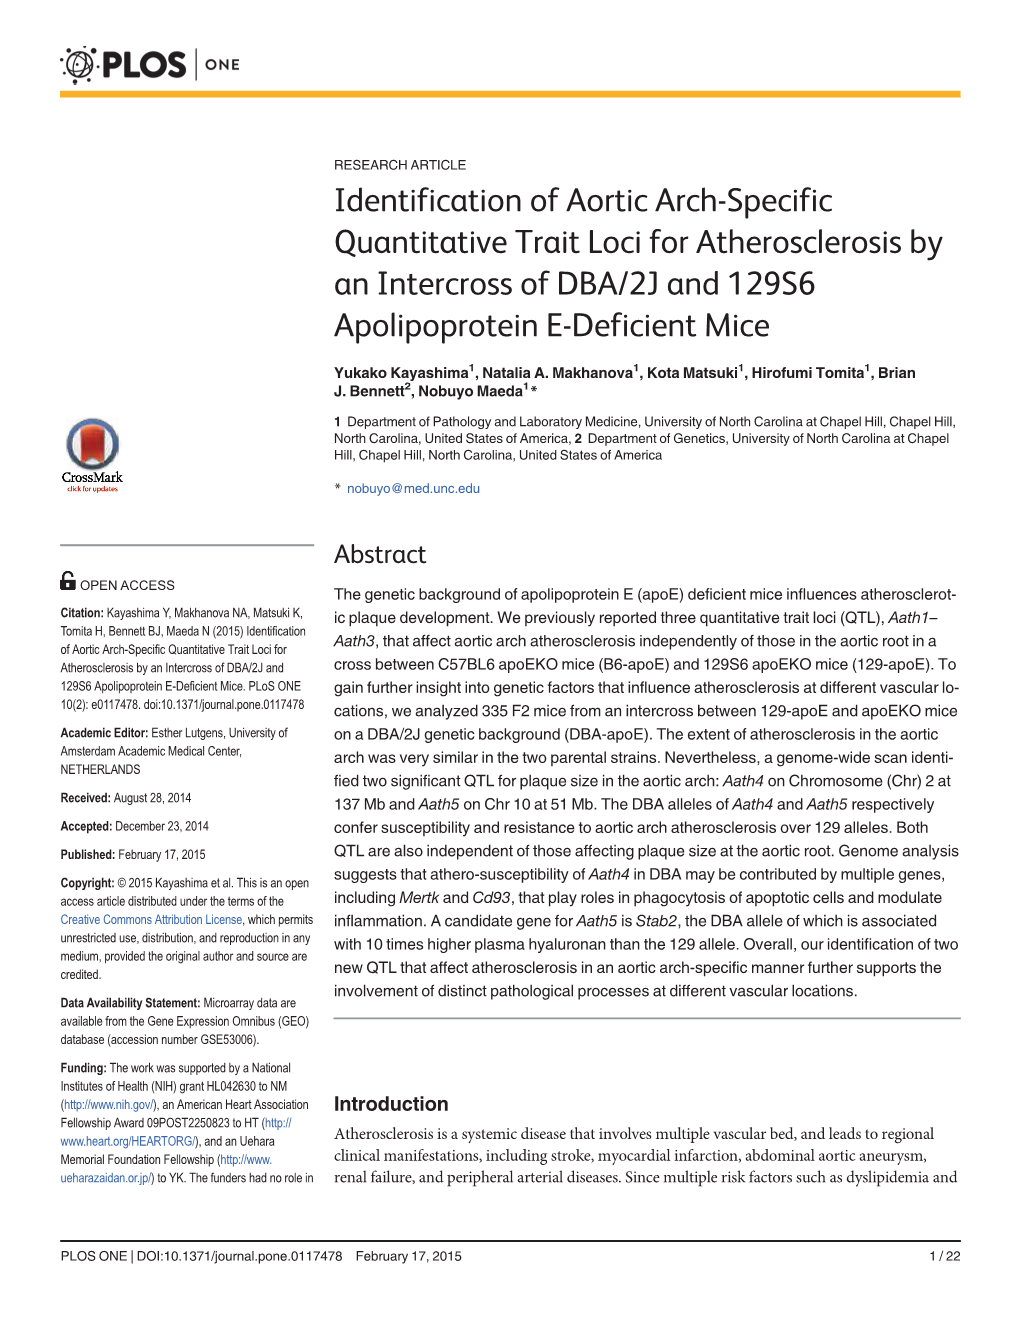 Identification of Aortic Arch-Specific Quantitative Trait Loci for Atherosclerosis by an Intercross of DBA/2J and 129S6 Apolipoprotein E-Deficient Mice